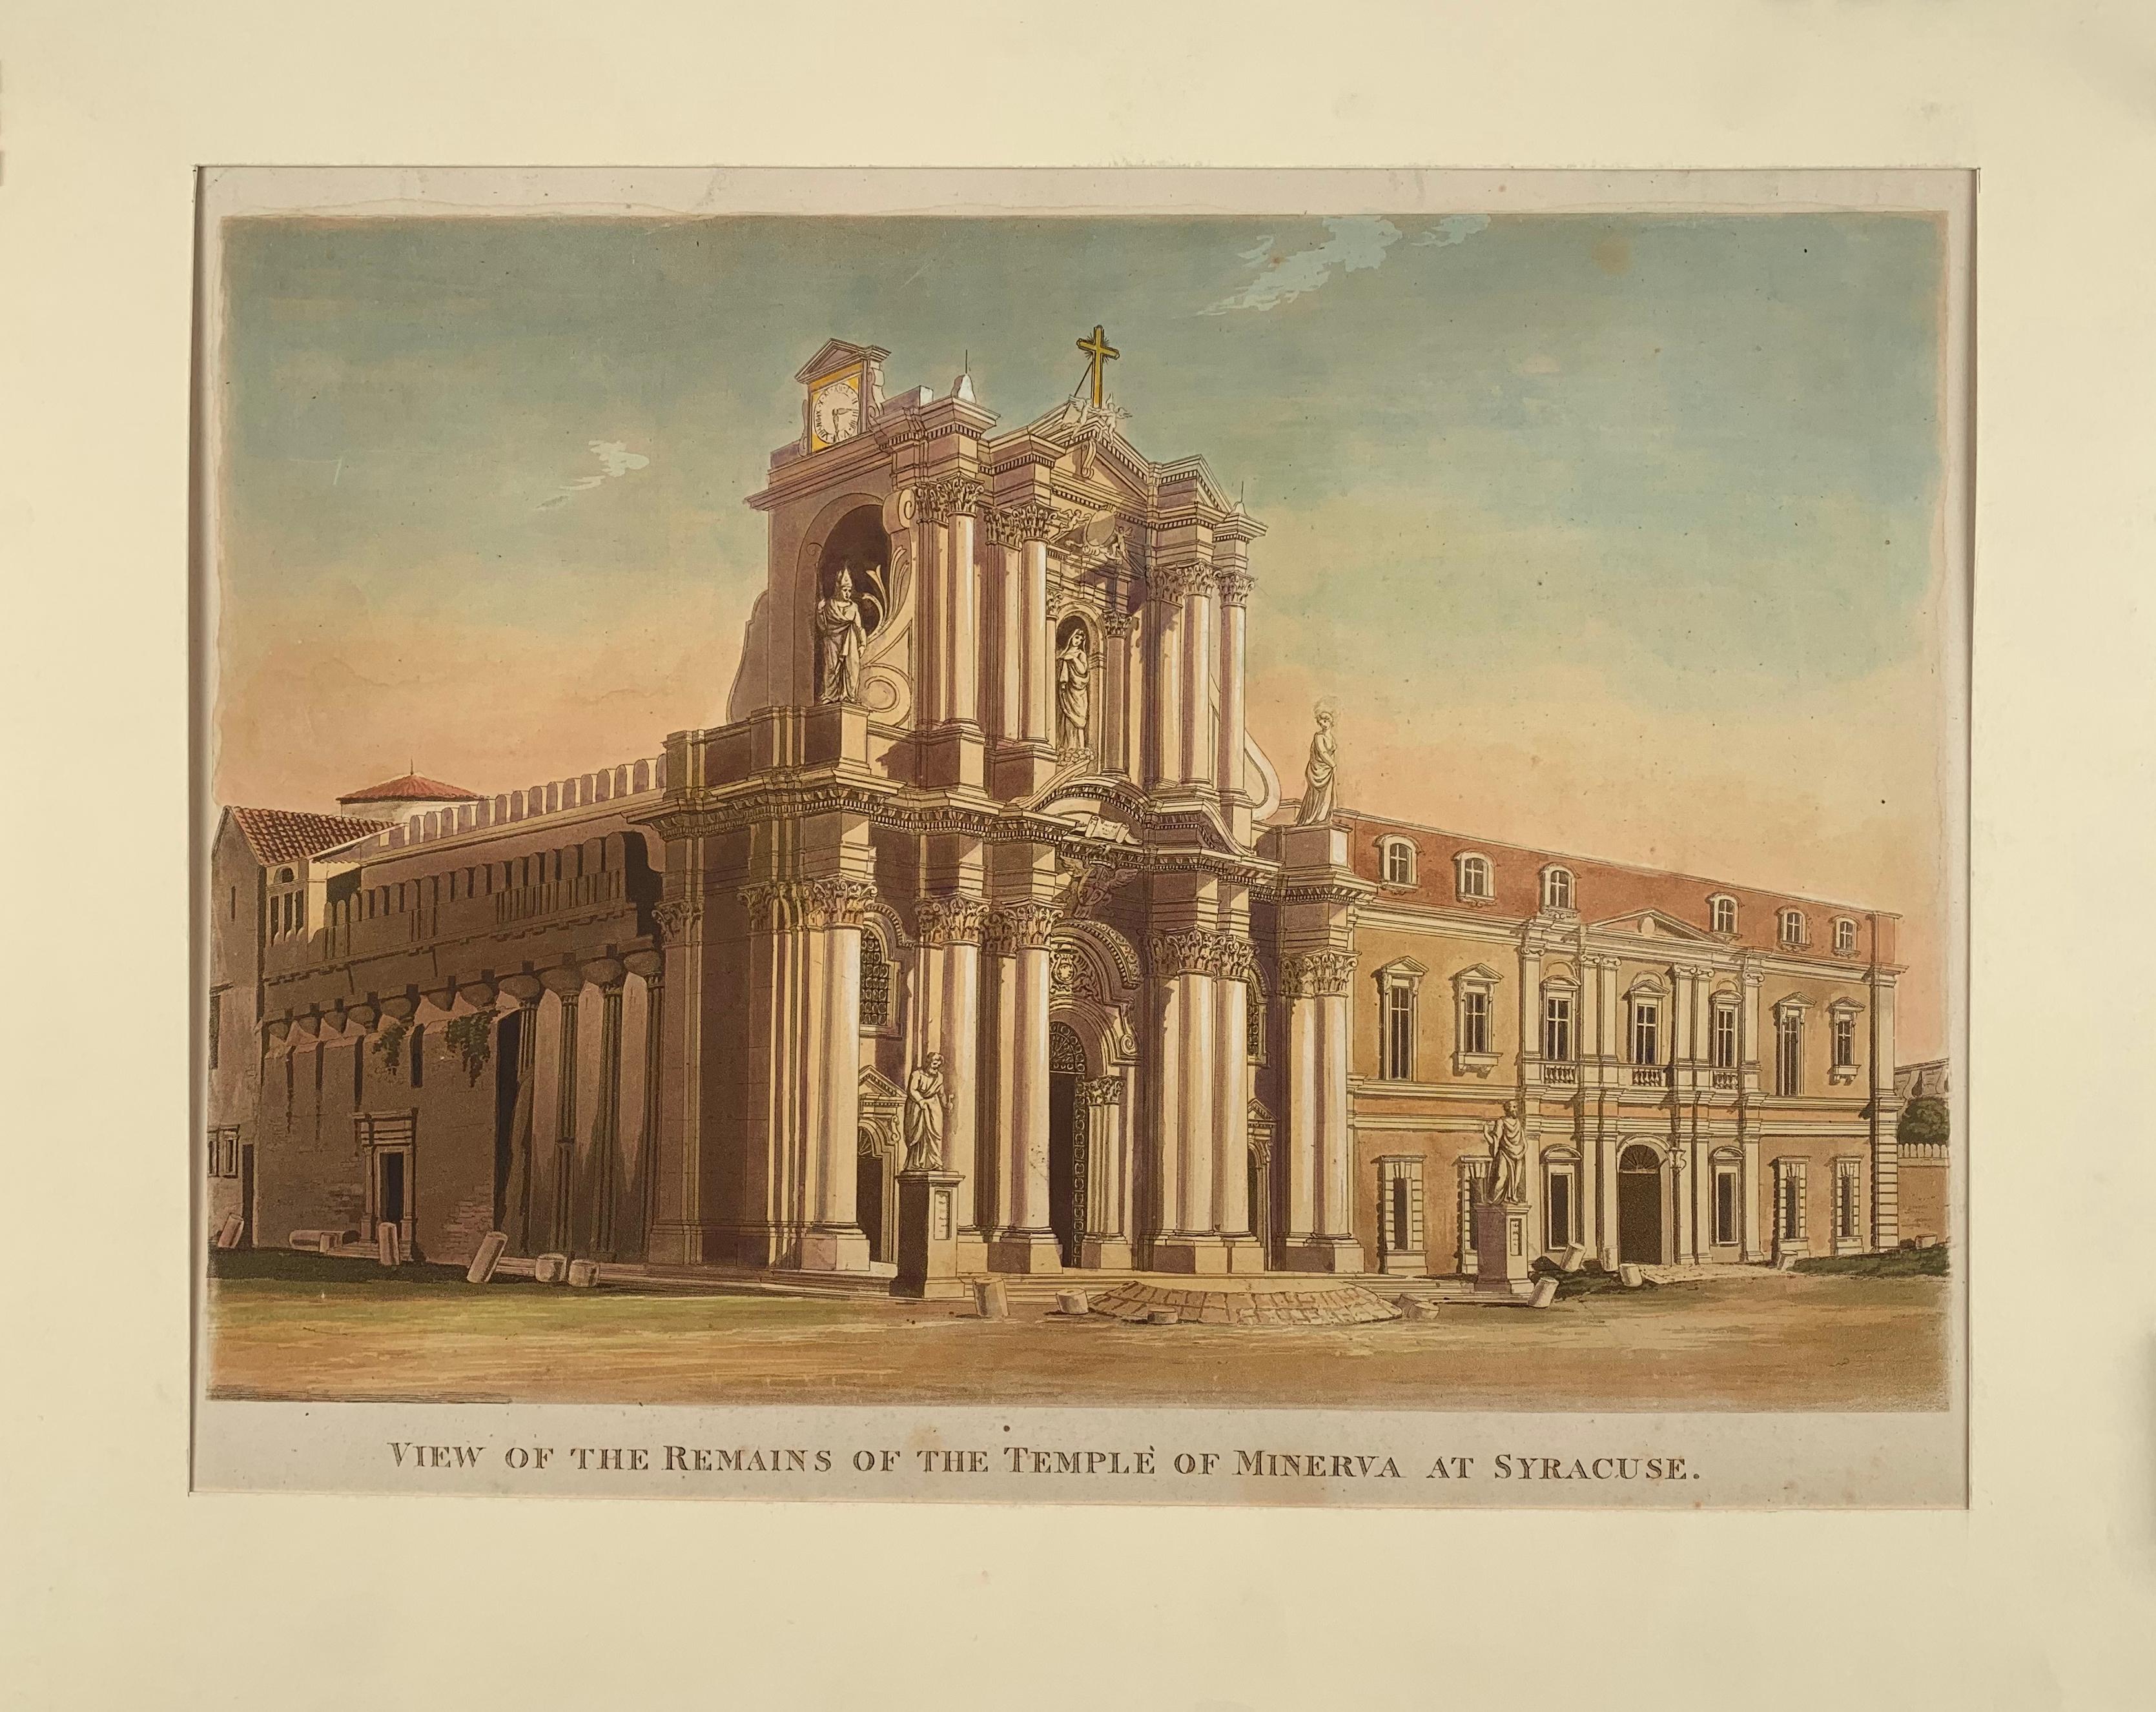 William Wilkins Print - View of the Remains of the Temple of Minerva at Syracuse